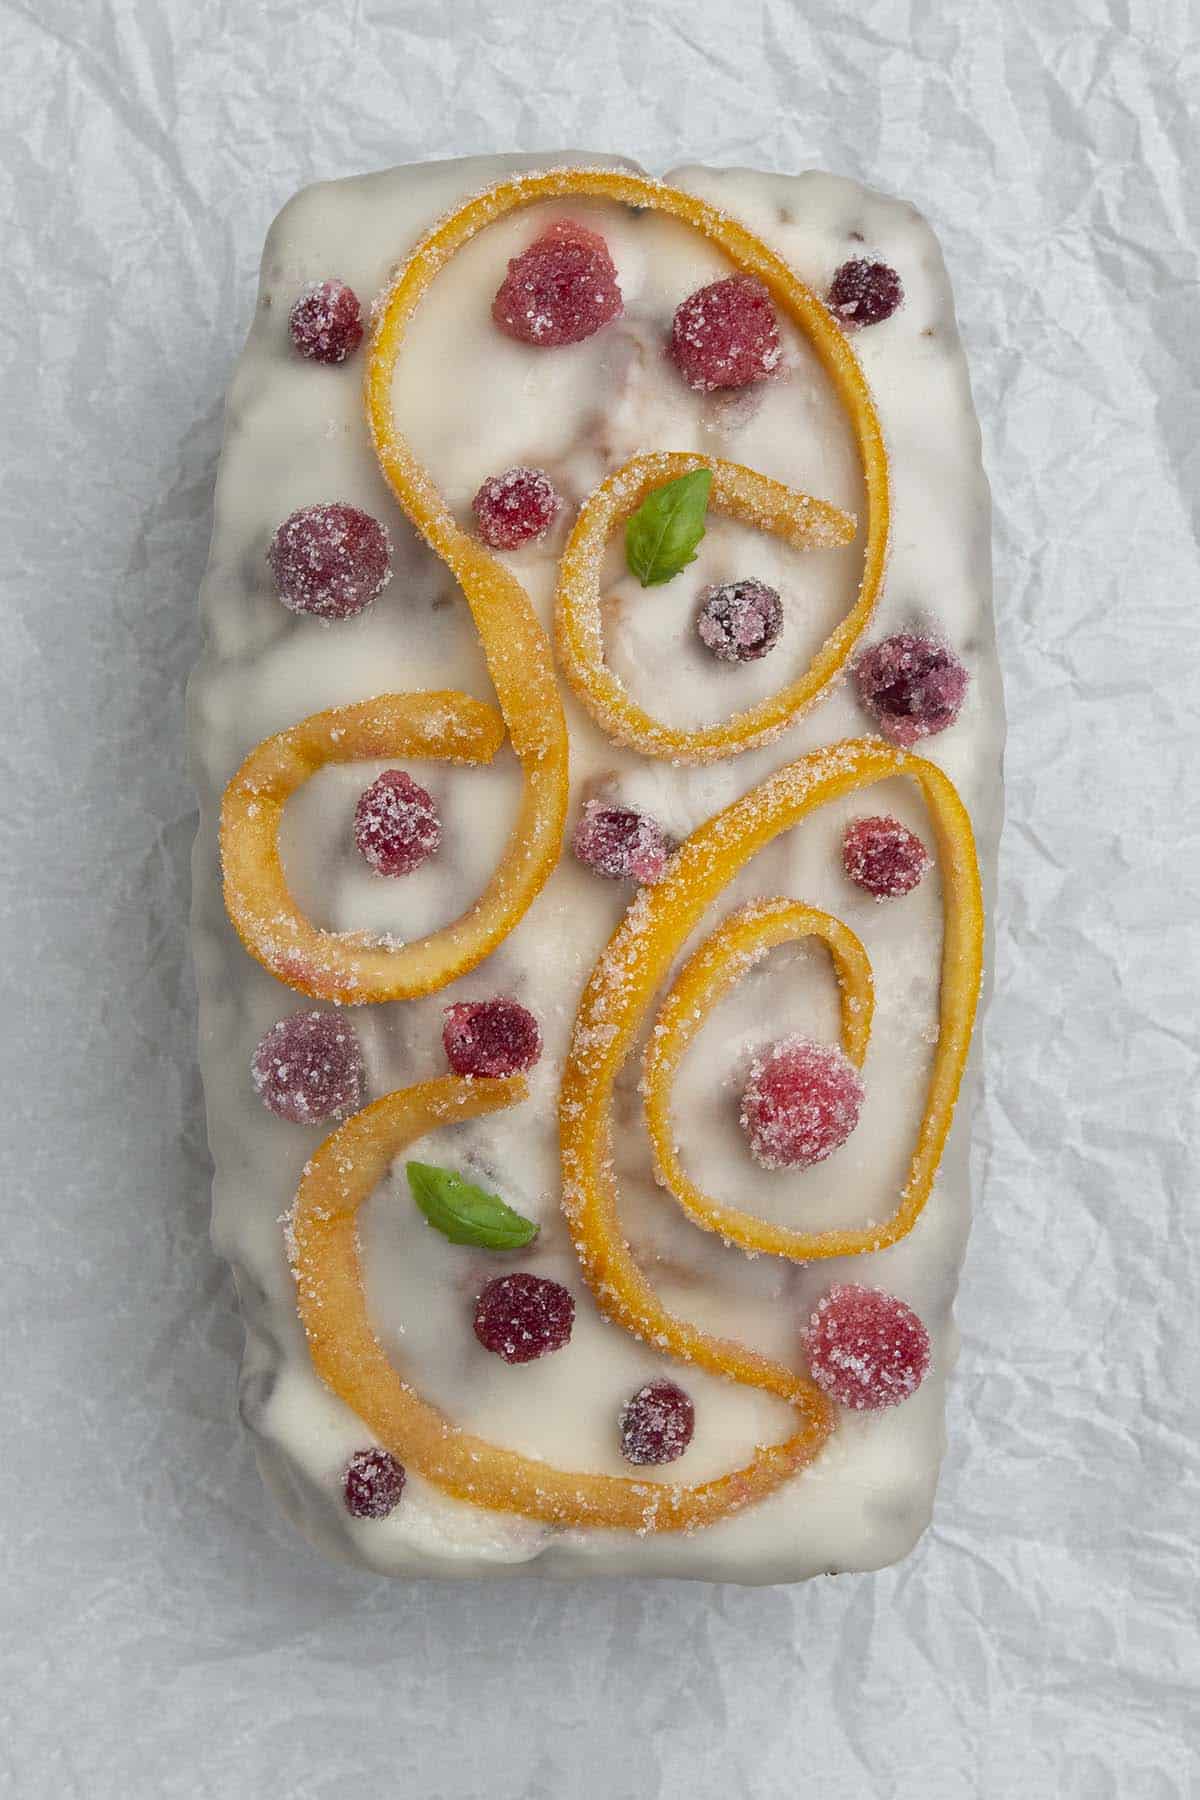 Top view of the decorated bread